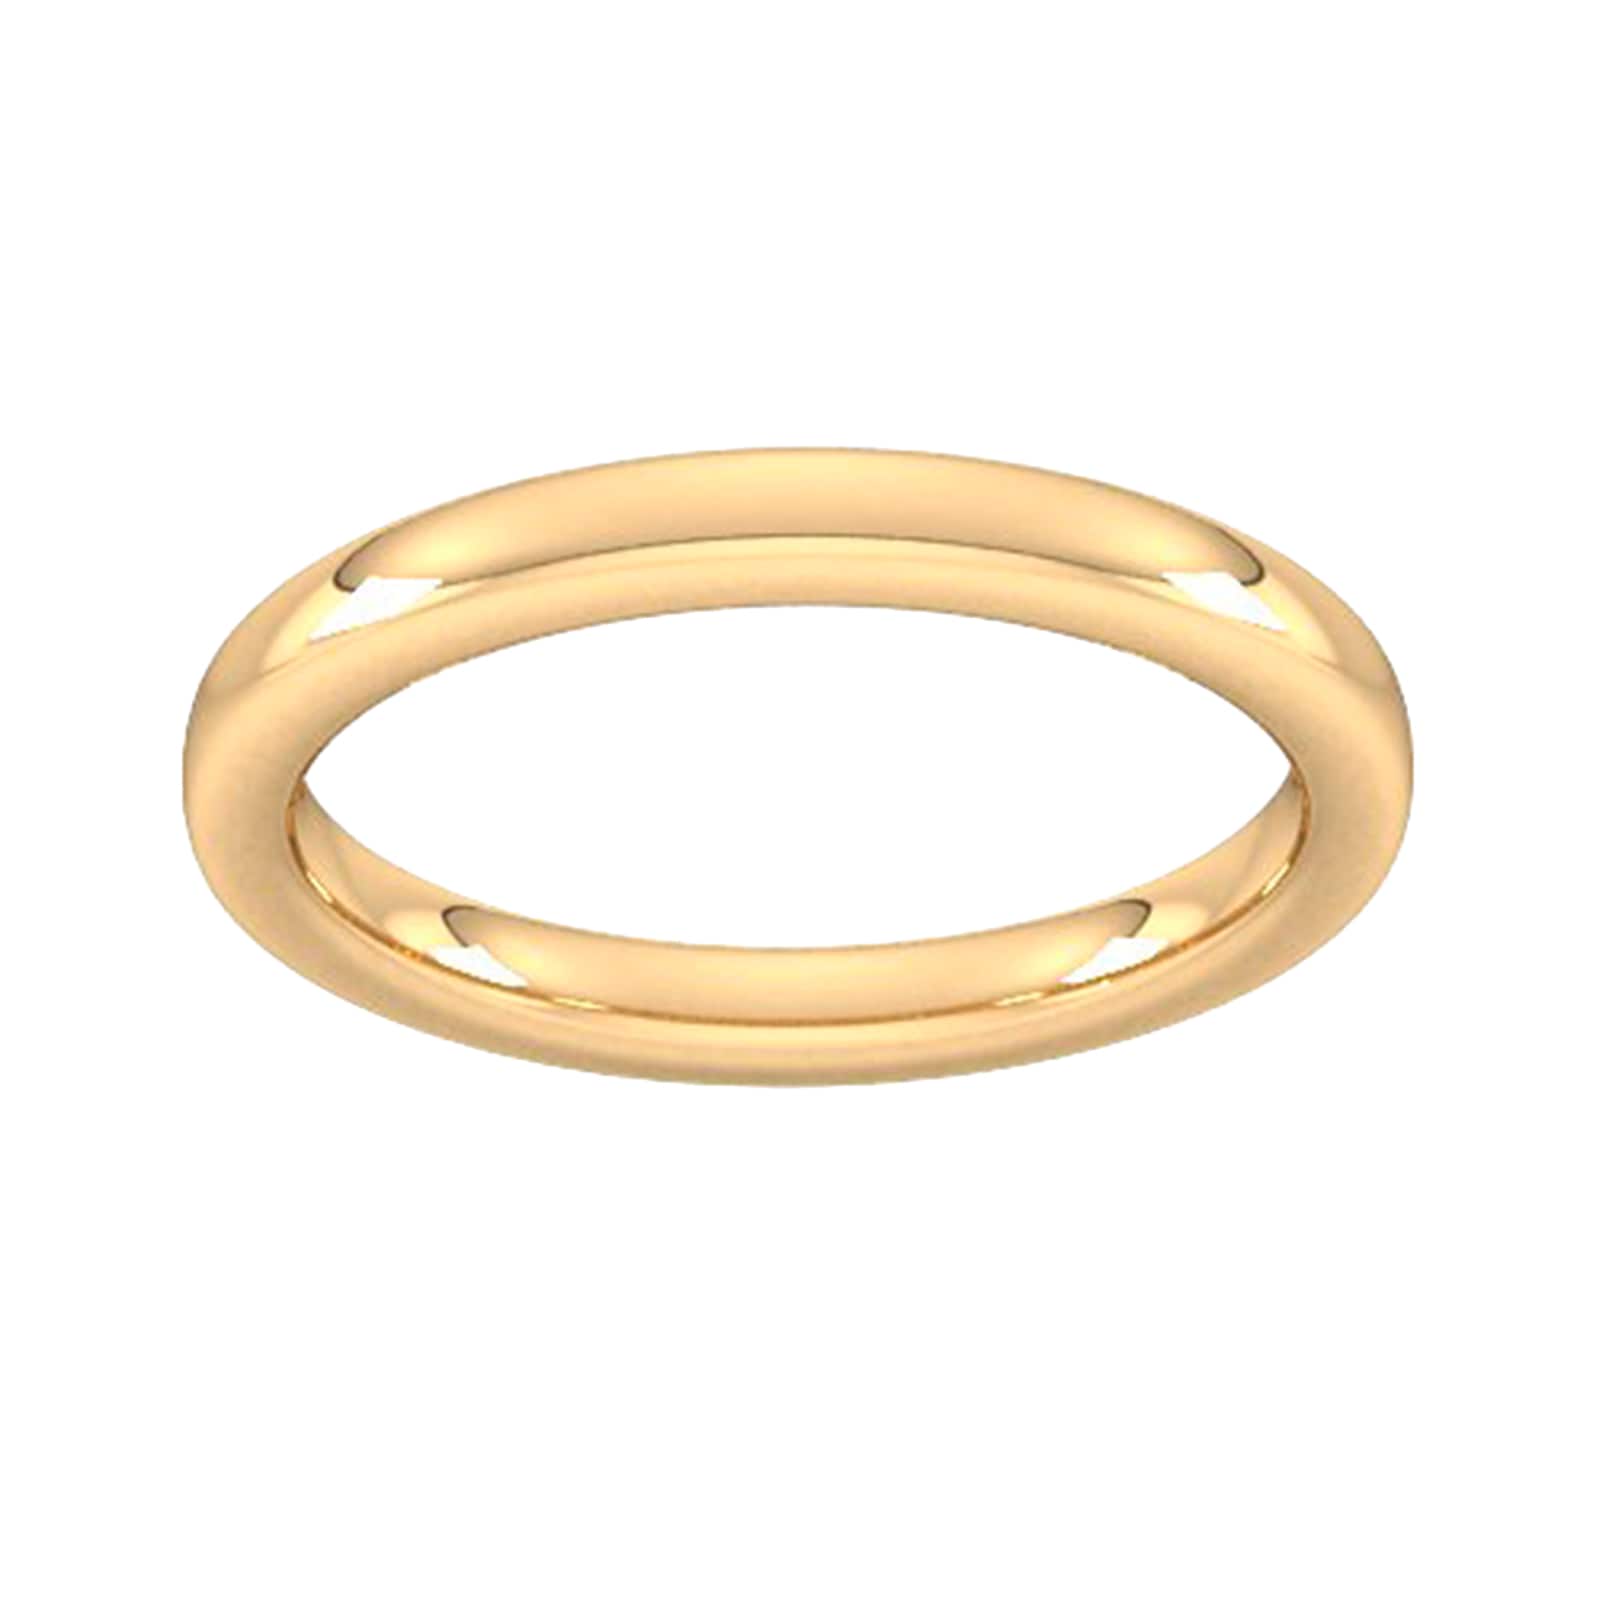 2.5mm Slight Court Extra Heavy Wedding Ring In 18 Carat Yellow Gold - Ring Size X